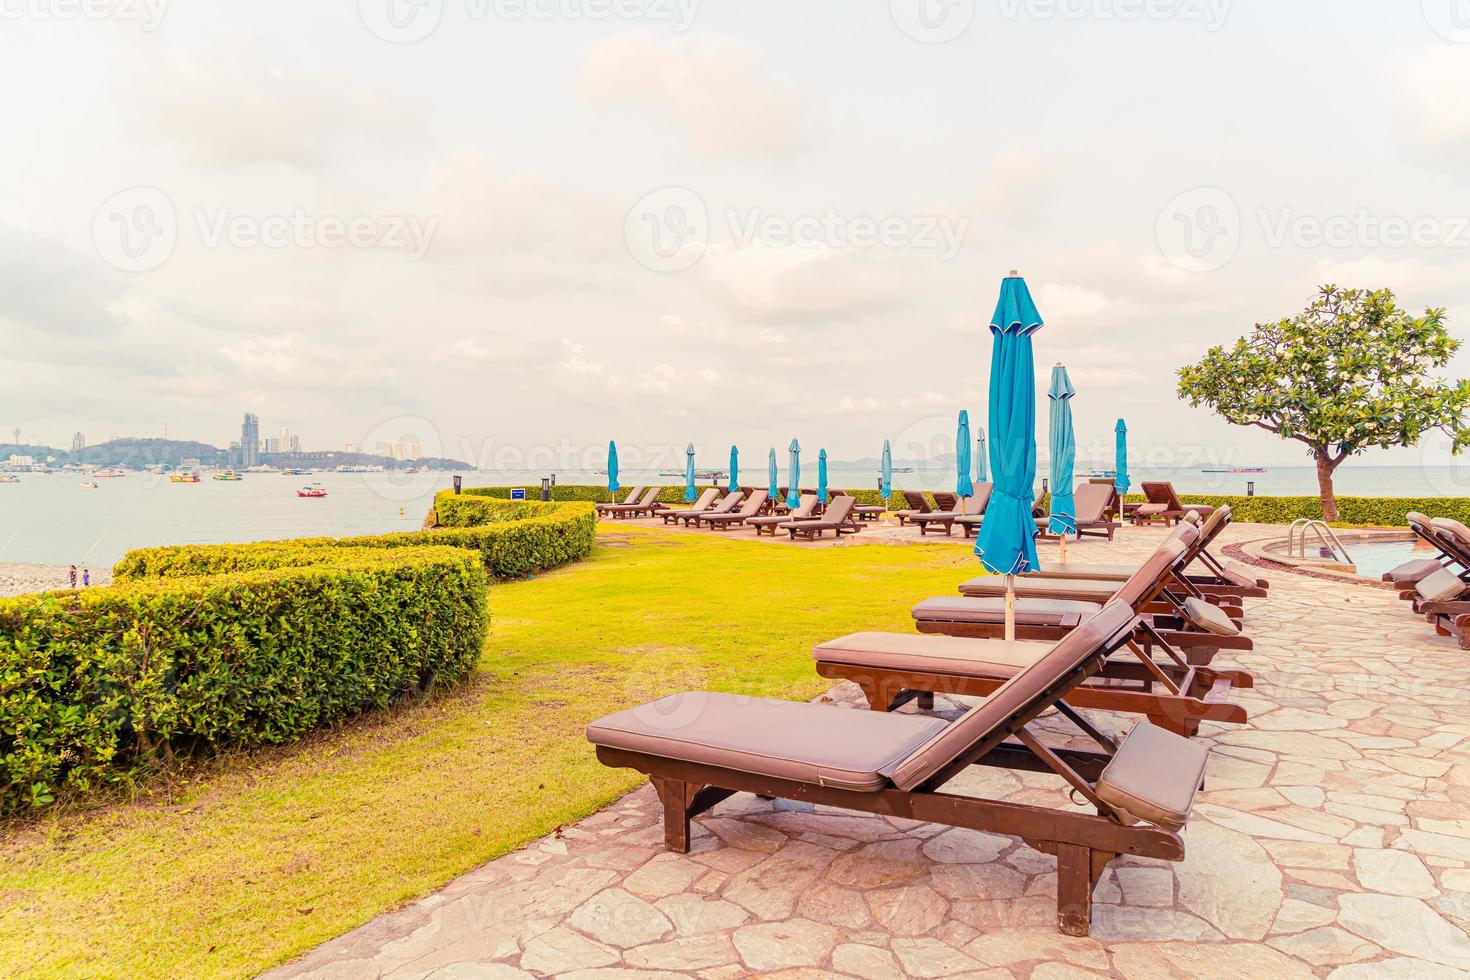 Chair pool or bed pool and umbrella around swimming pool with sea beach background at Pattaya in Thailand photo